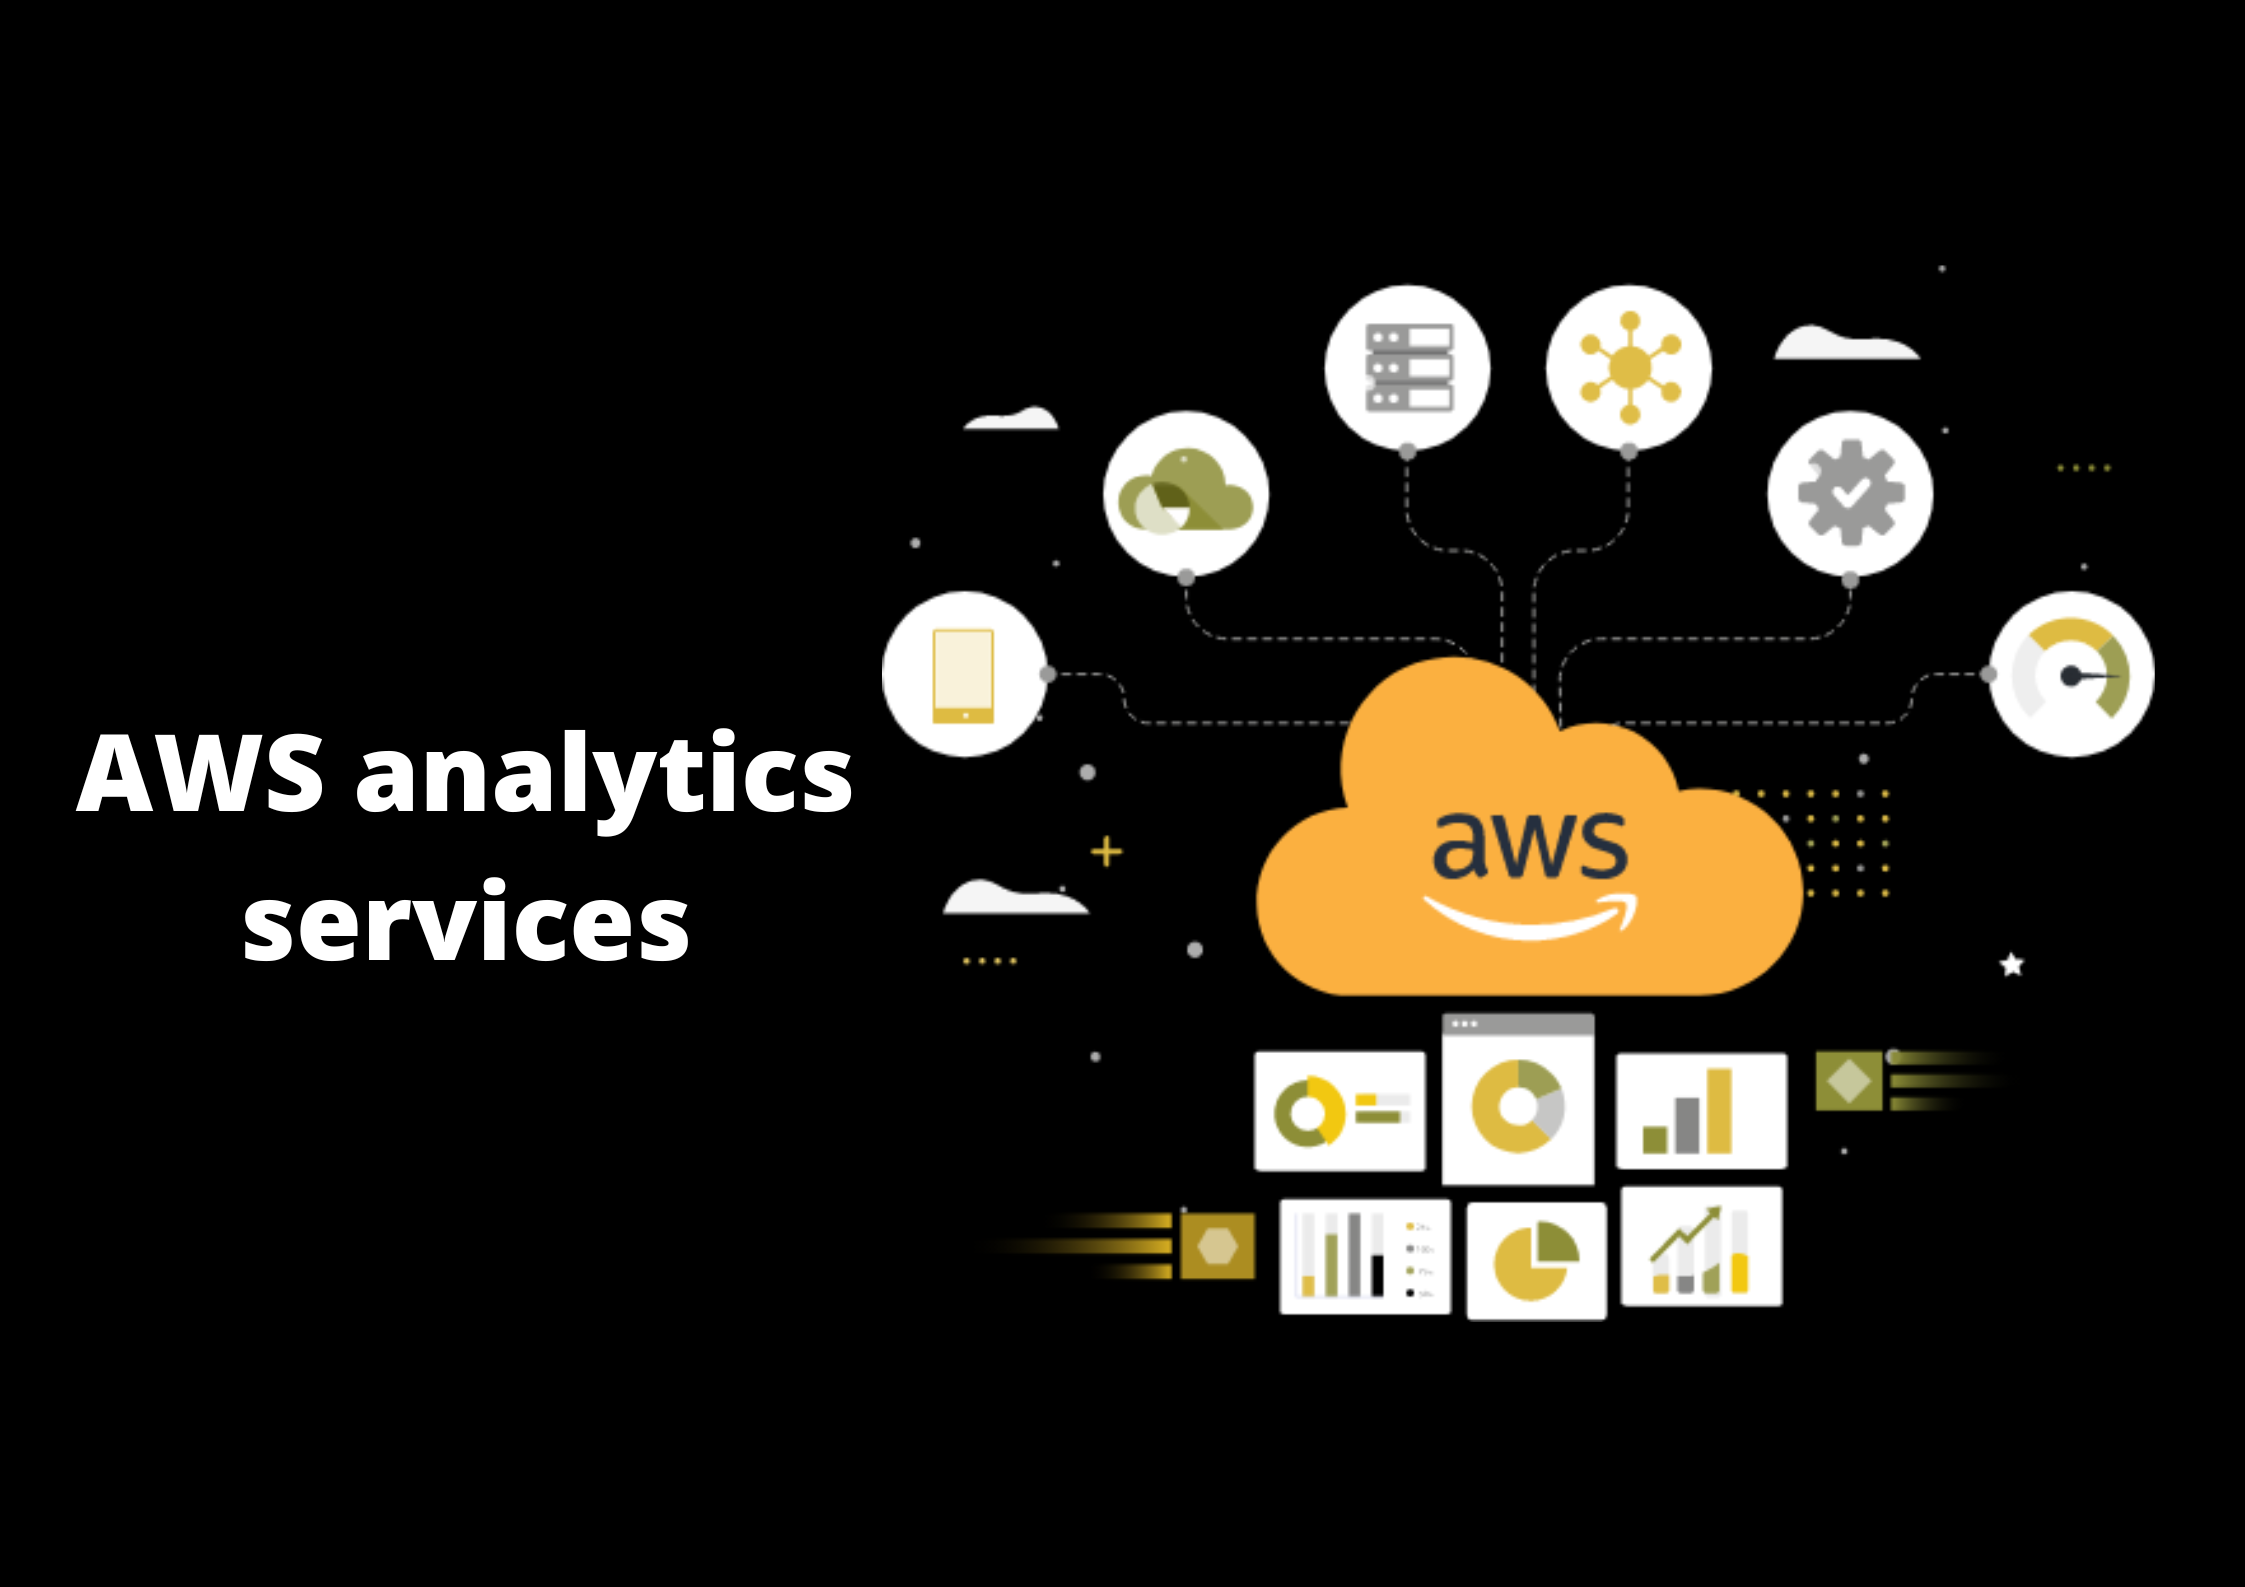 Choosing the AWS analytics service for your business